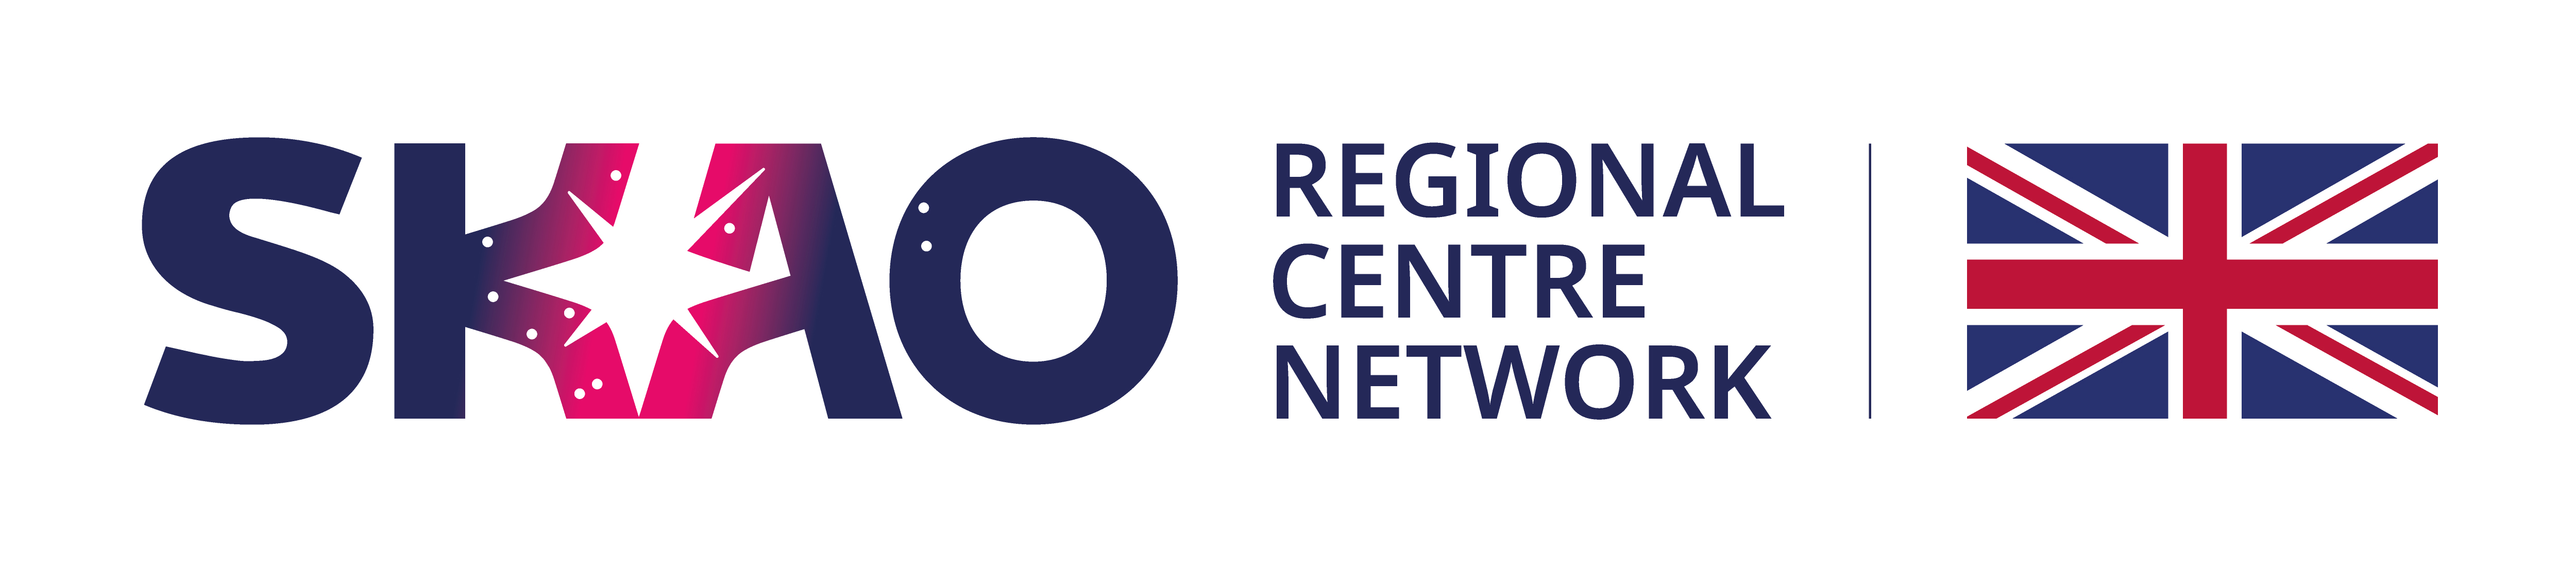 UKSRC - Design and develop the UK node within the global Square Kilometre Array Regional Centre Network